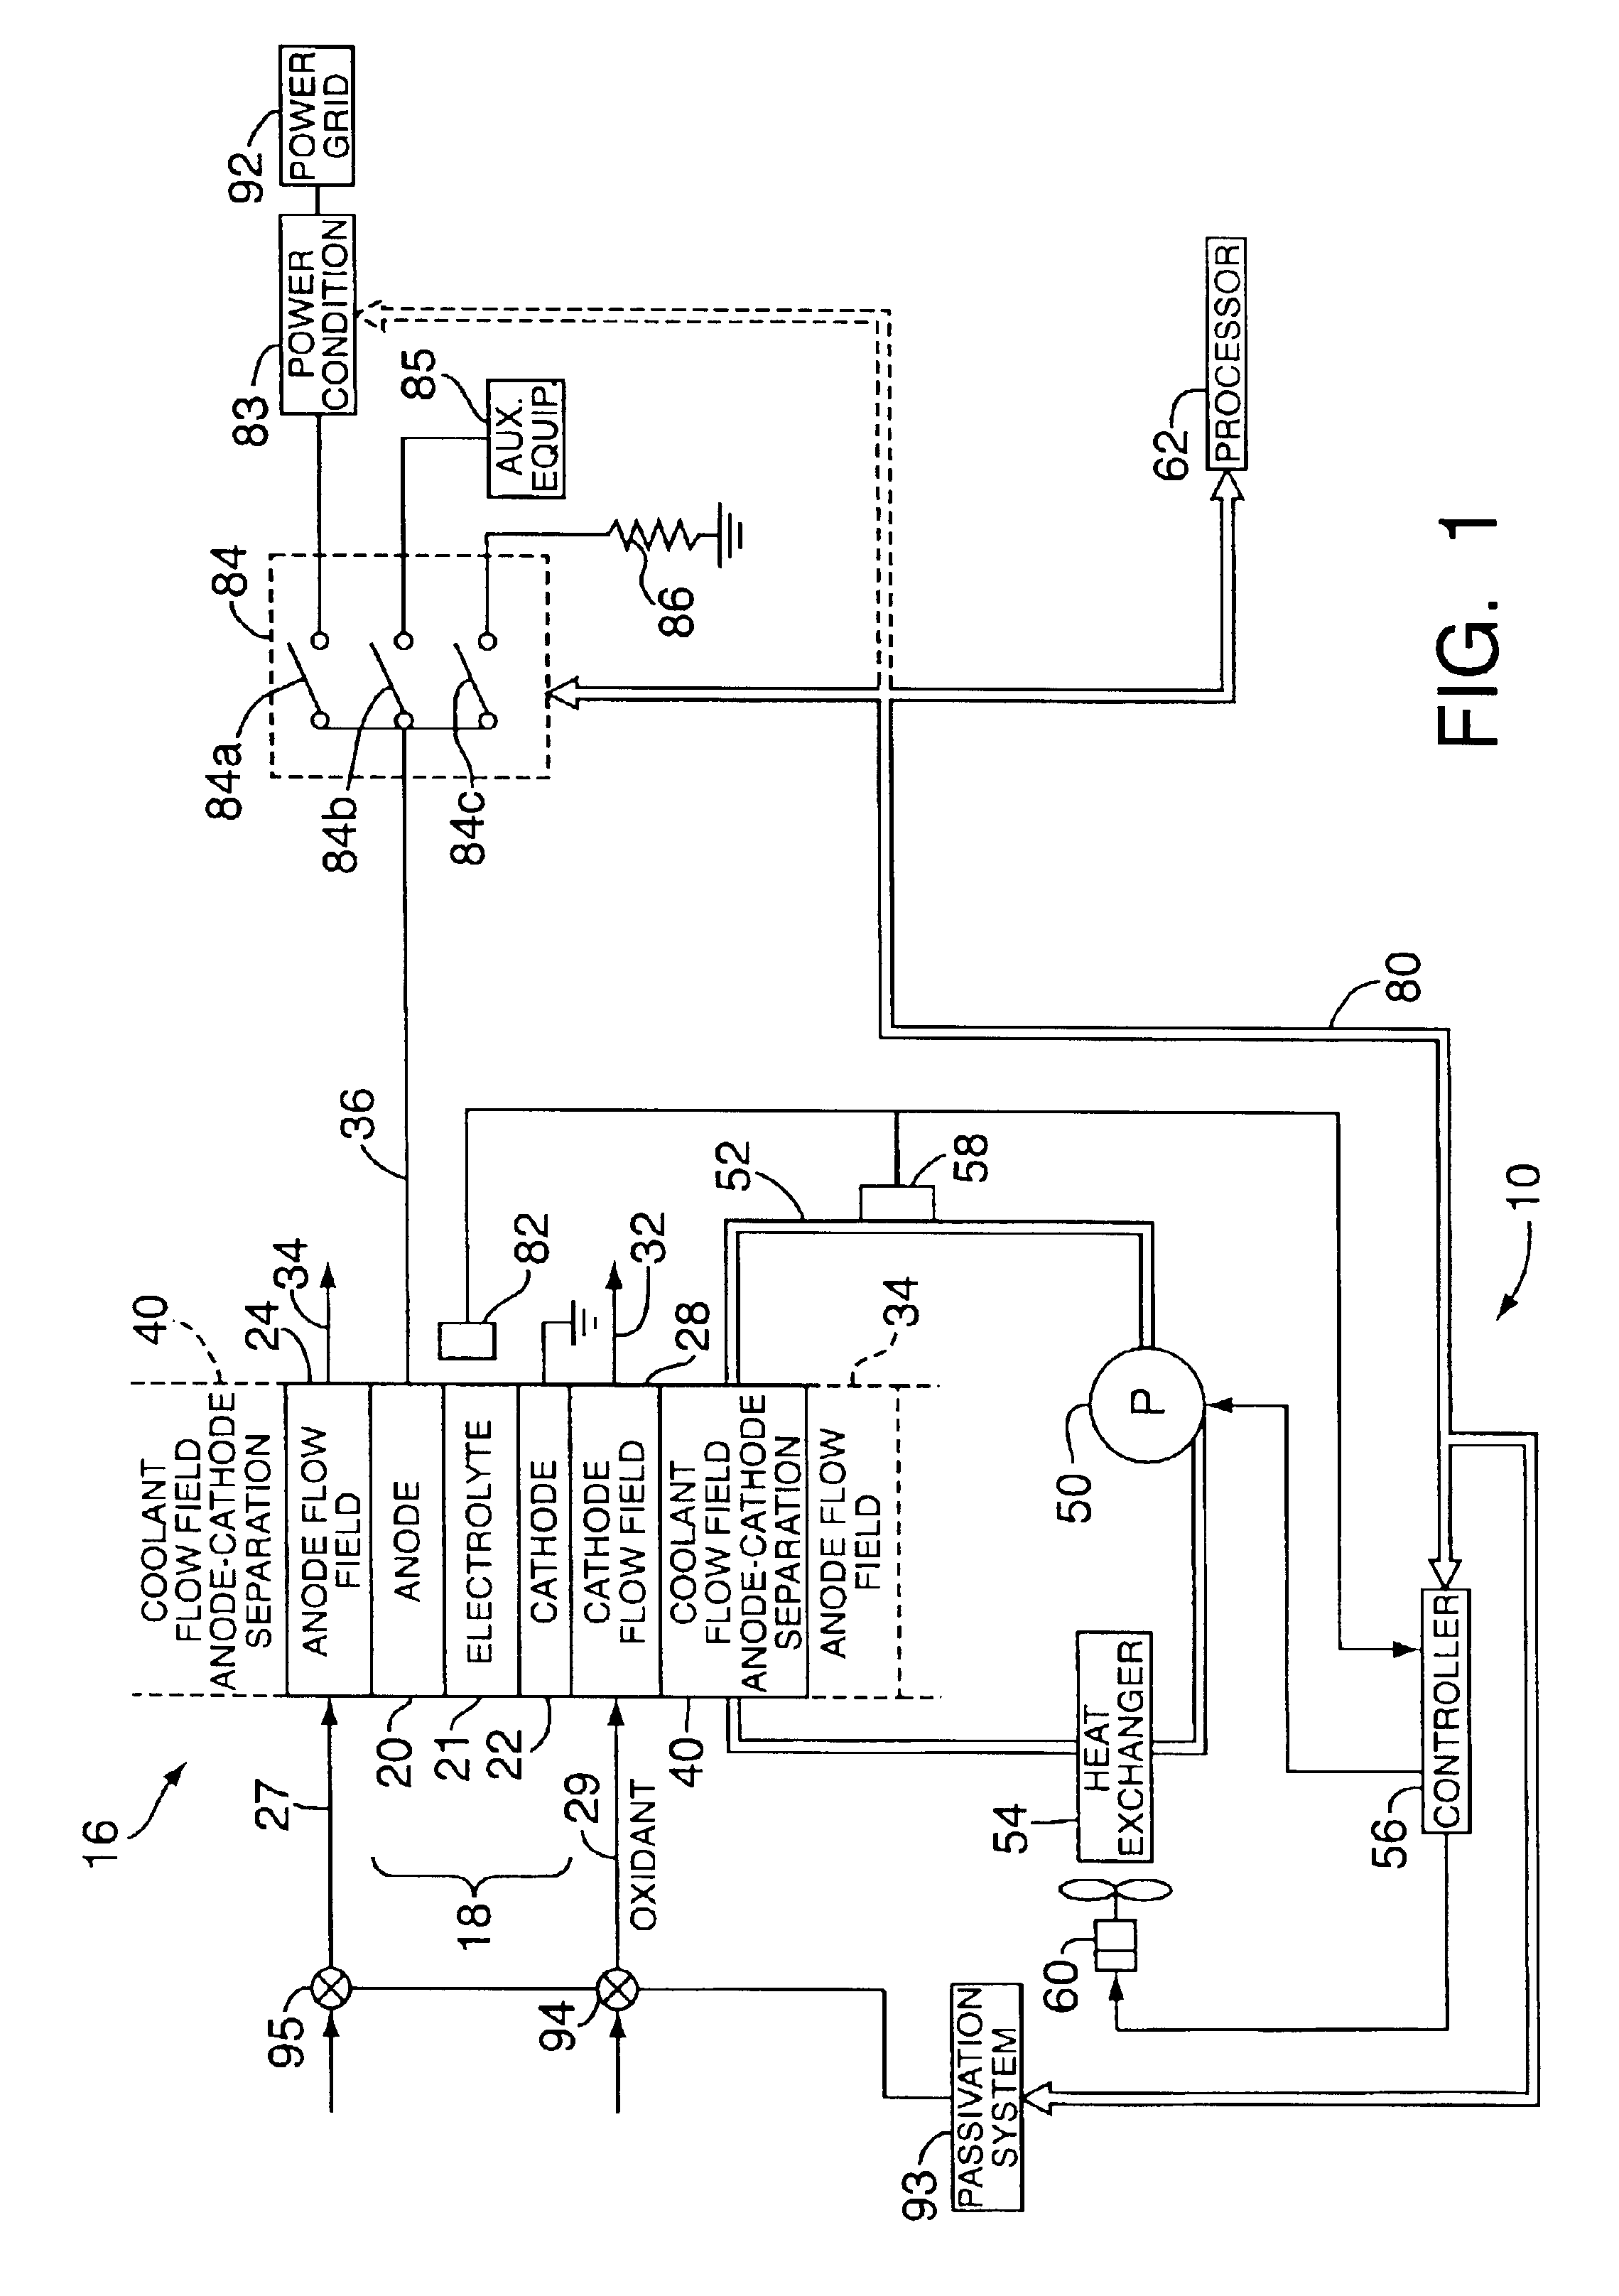 Method and apparatus for operating a fuel cell system